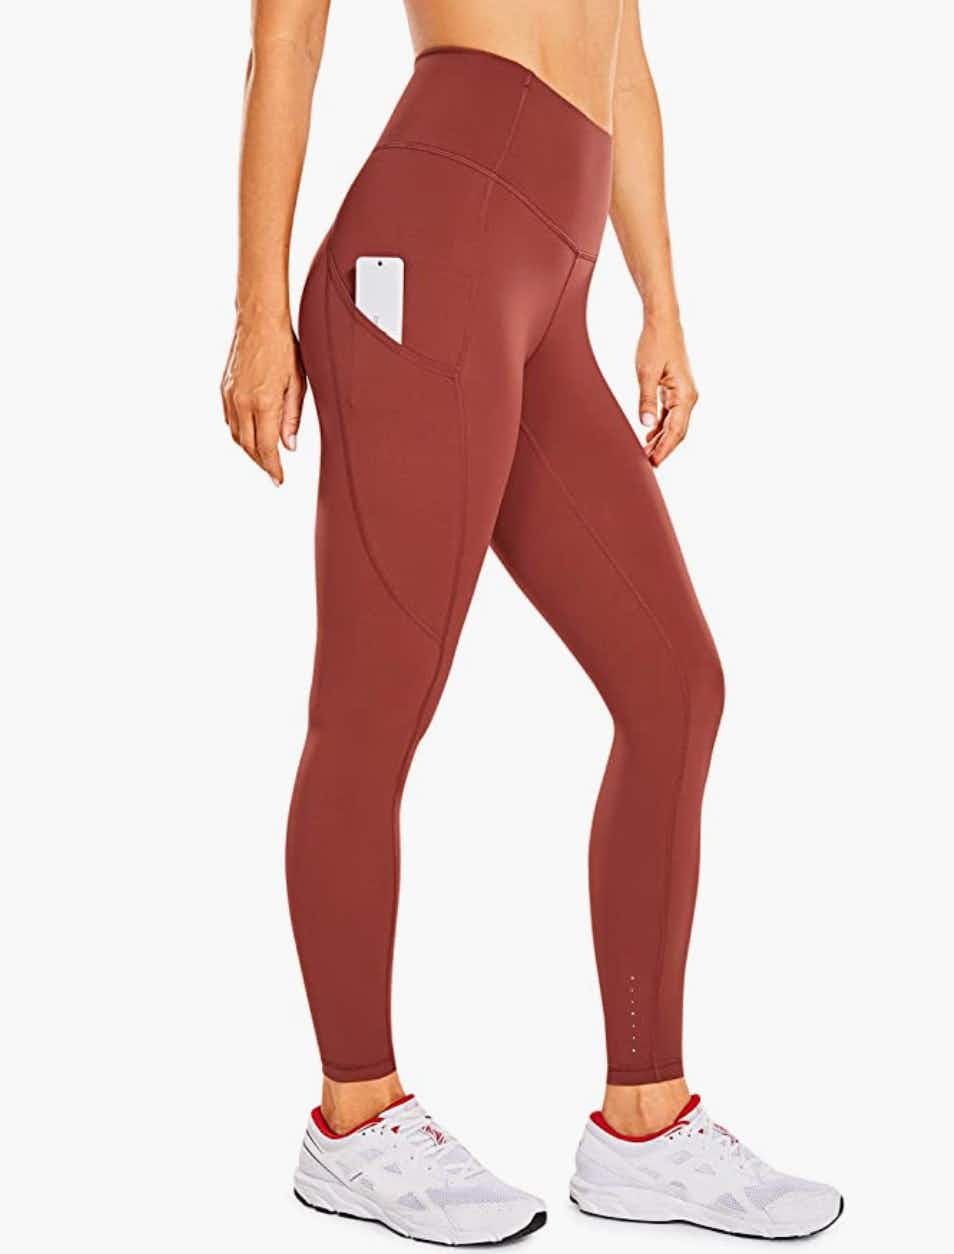 Are Costco Yoga Pants Made by Lululemon? - Playbite